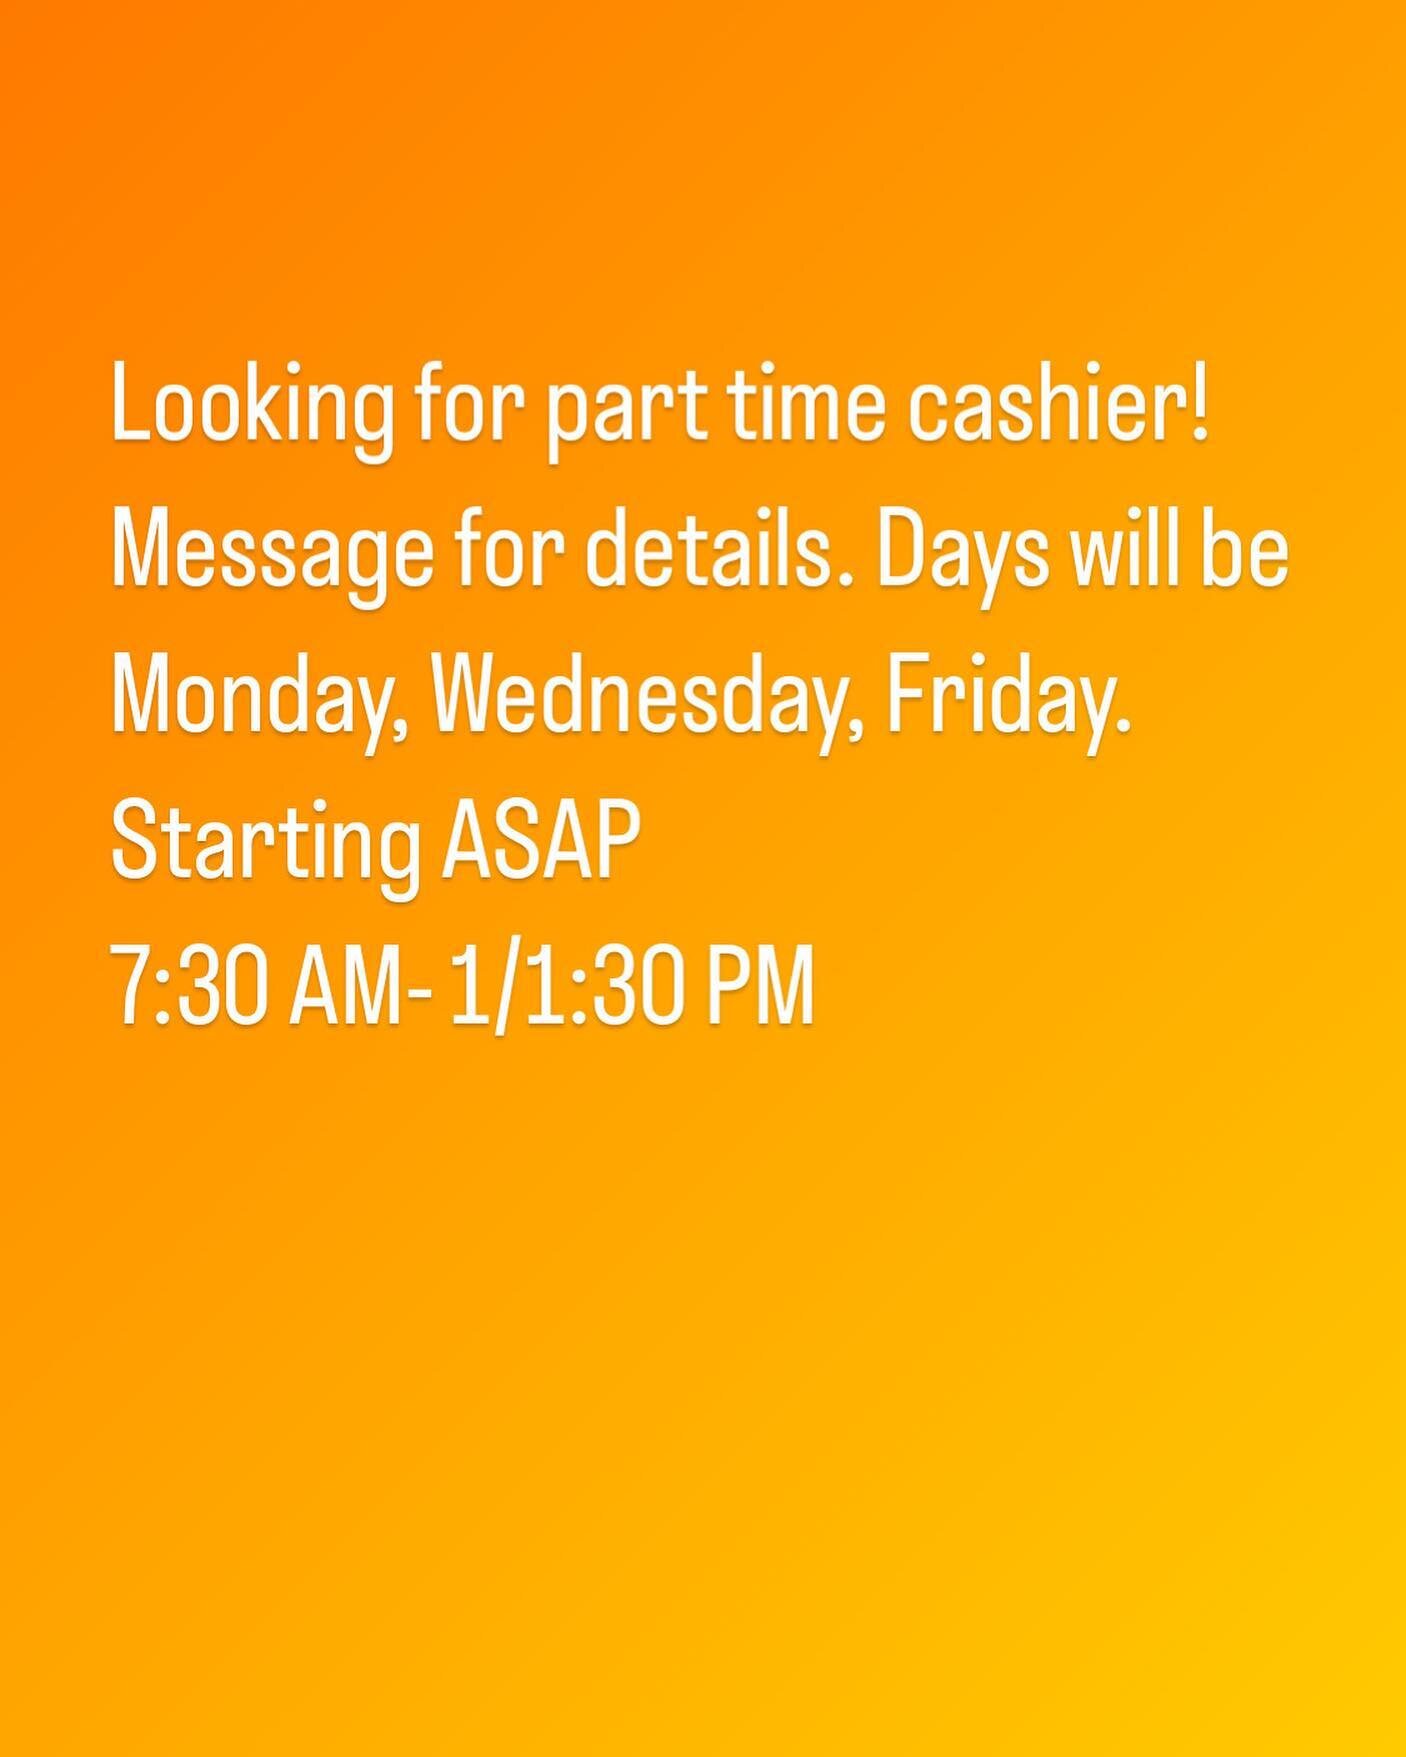 Part Time Cashier needed ASAP!  DM us or call at 845-499-2671
Thank you!